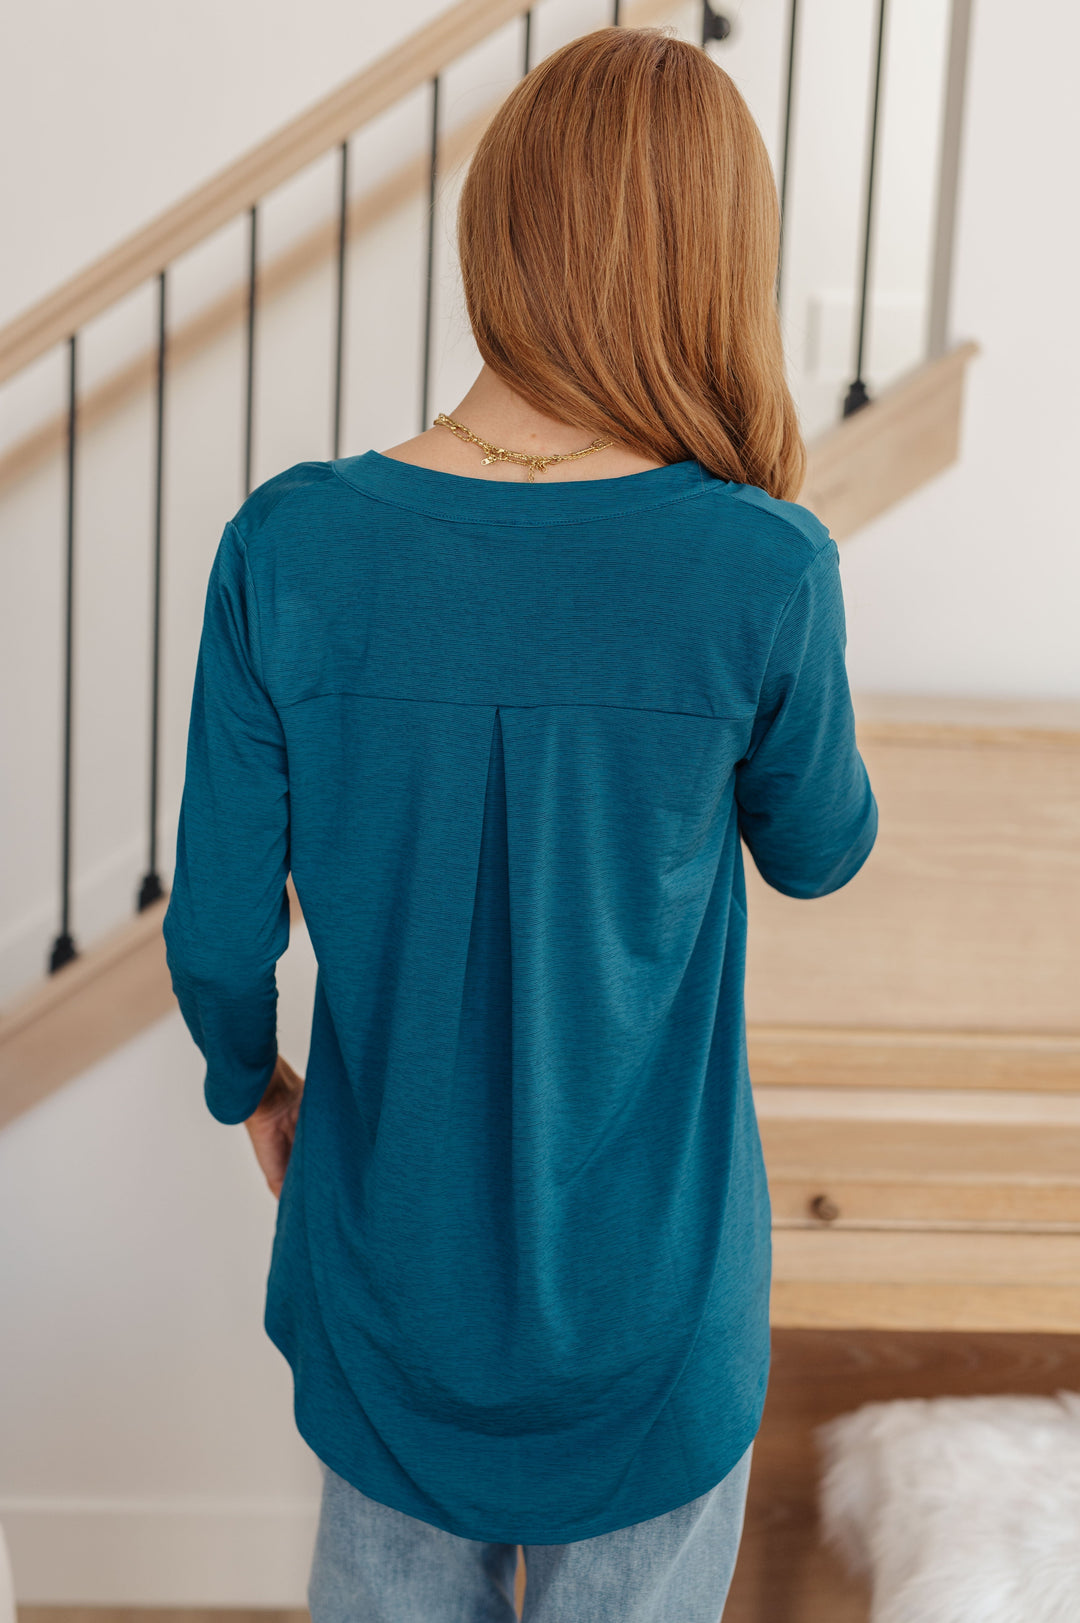 Womens - So Outstanding Top In Teal